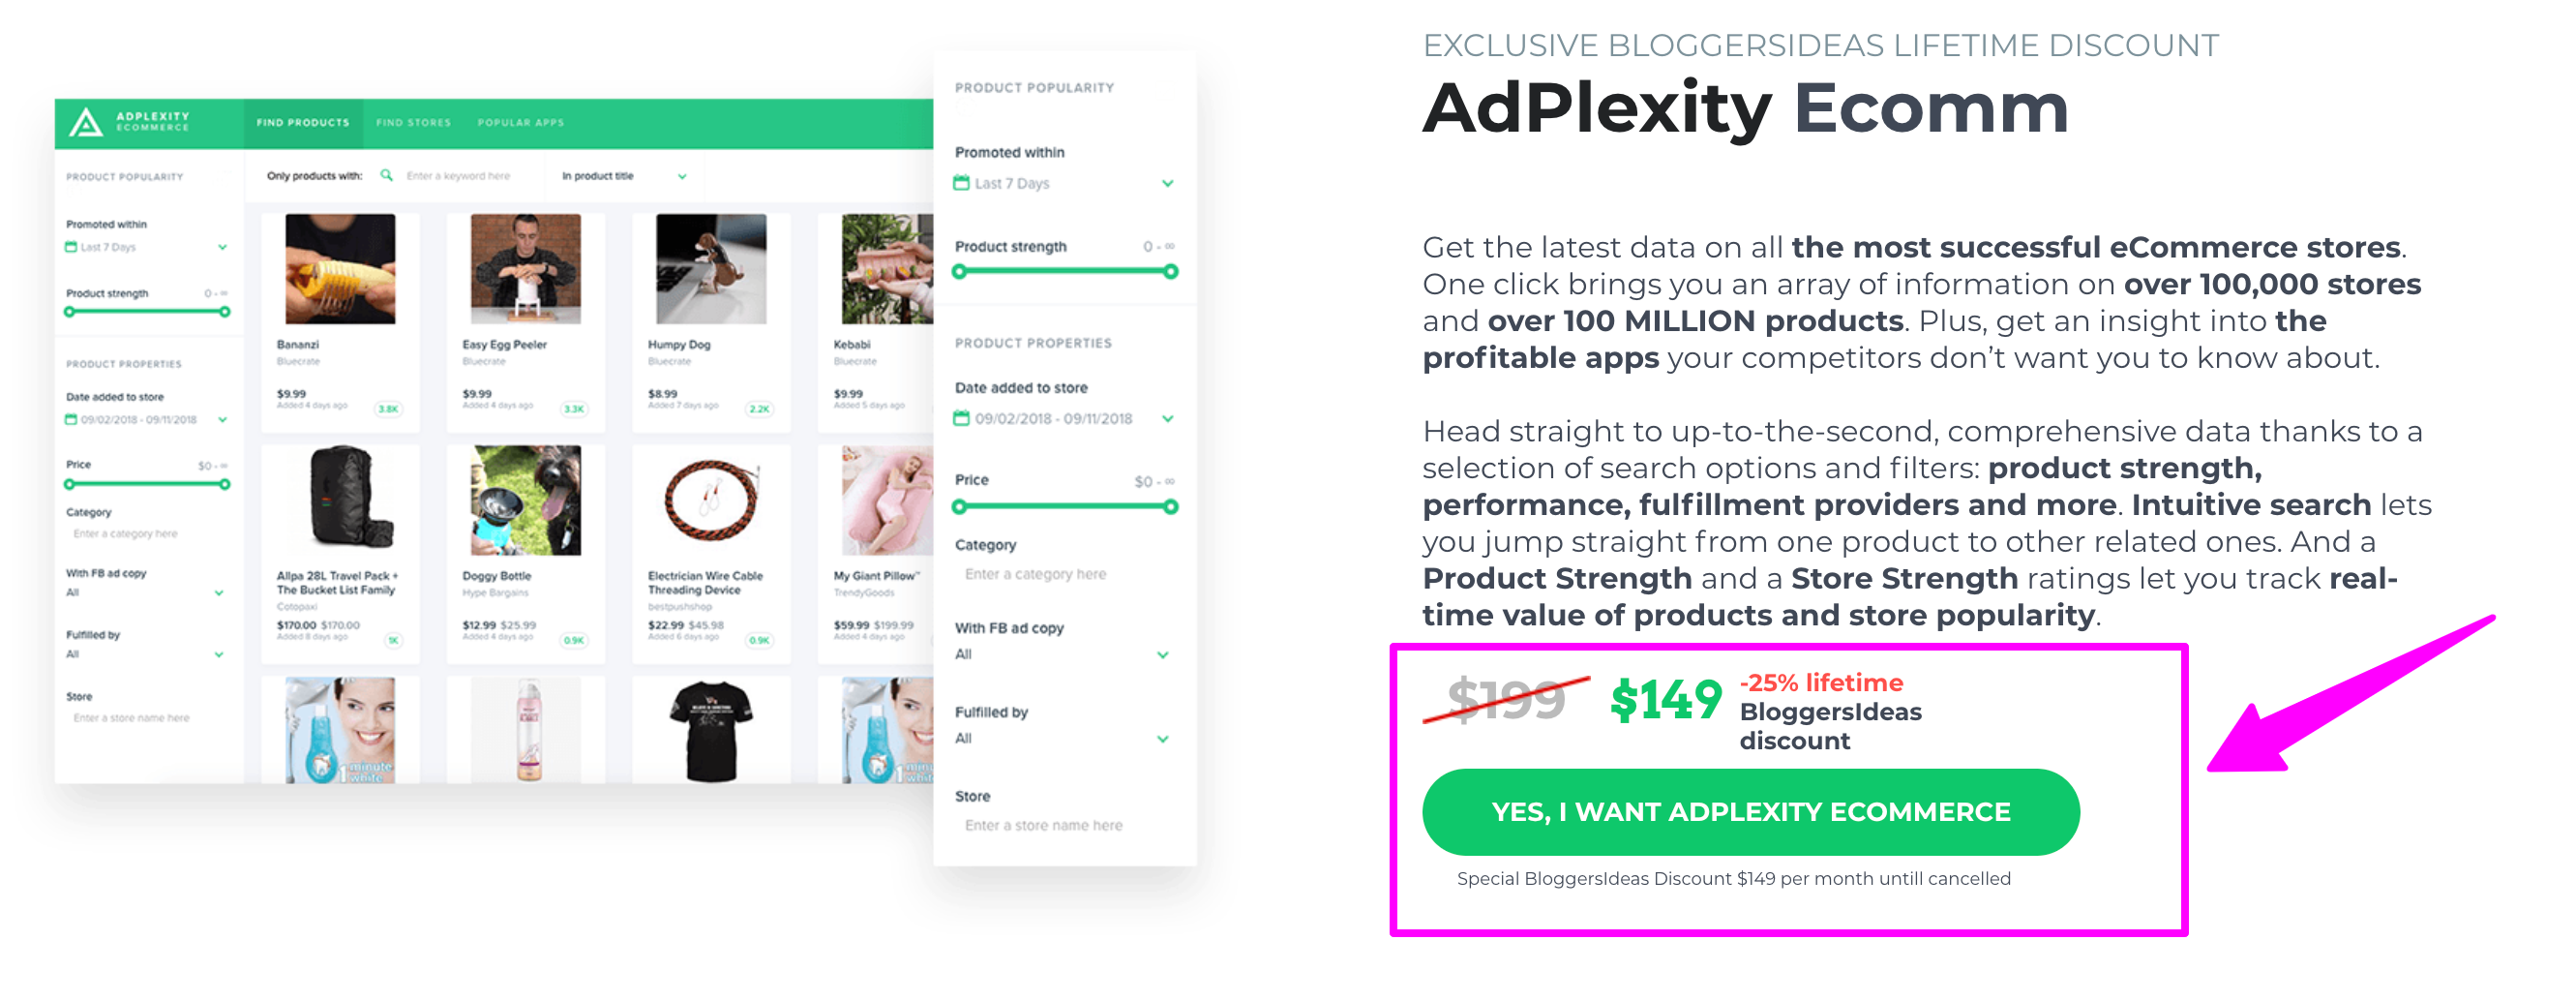 adpelxity for ecommerce